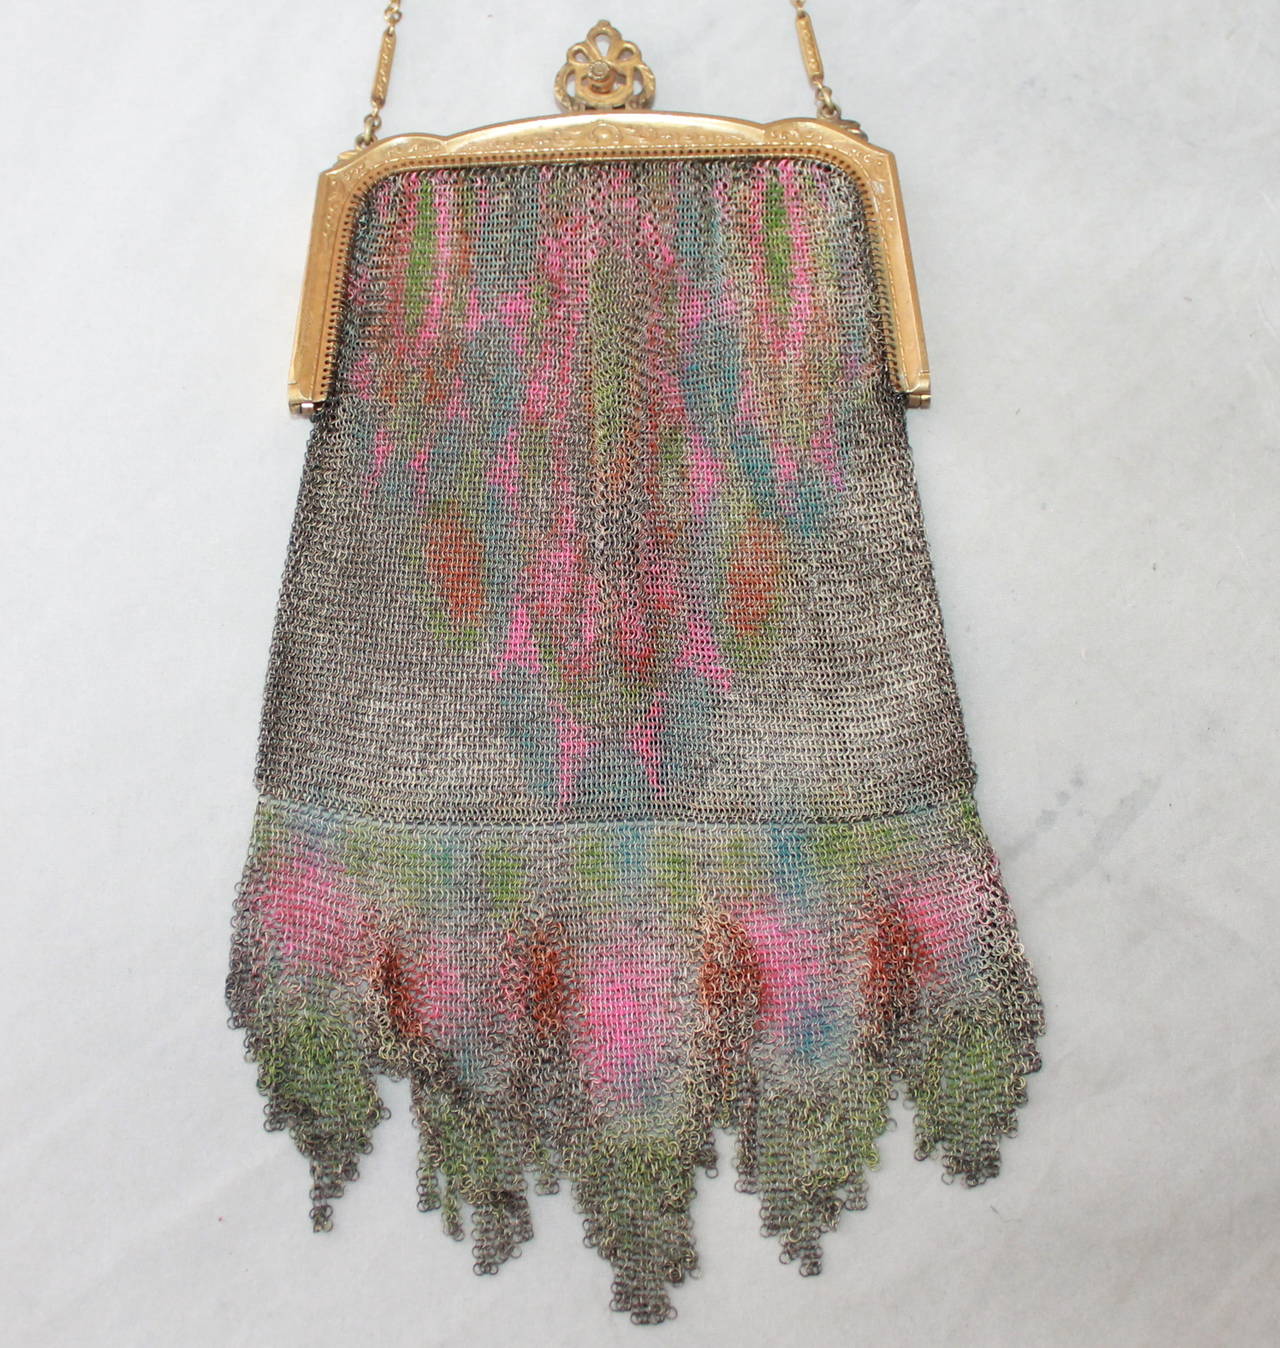 Edwardian Vintage Whiting & Davis Dresden Multi-Color Mesh Bag. This bag is in excellent vintage condition with a fringe-look on the bottom. The hardware is starting to show minor dark spots due to it being so old. 

Height- 7.5